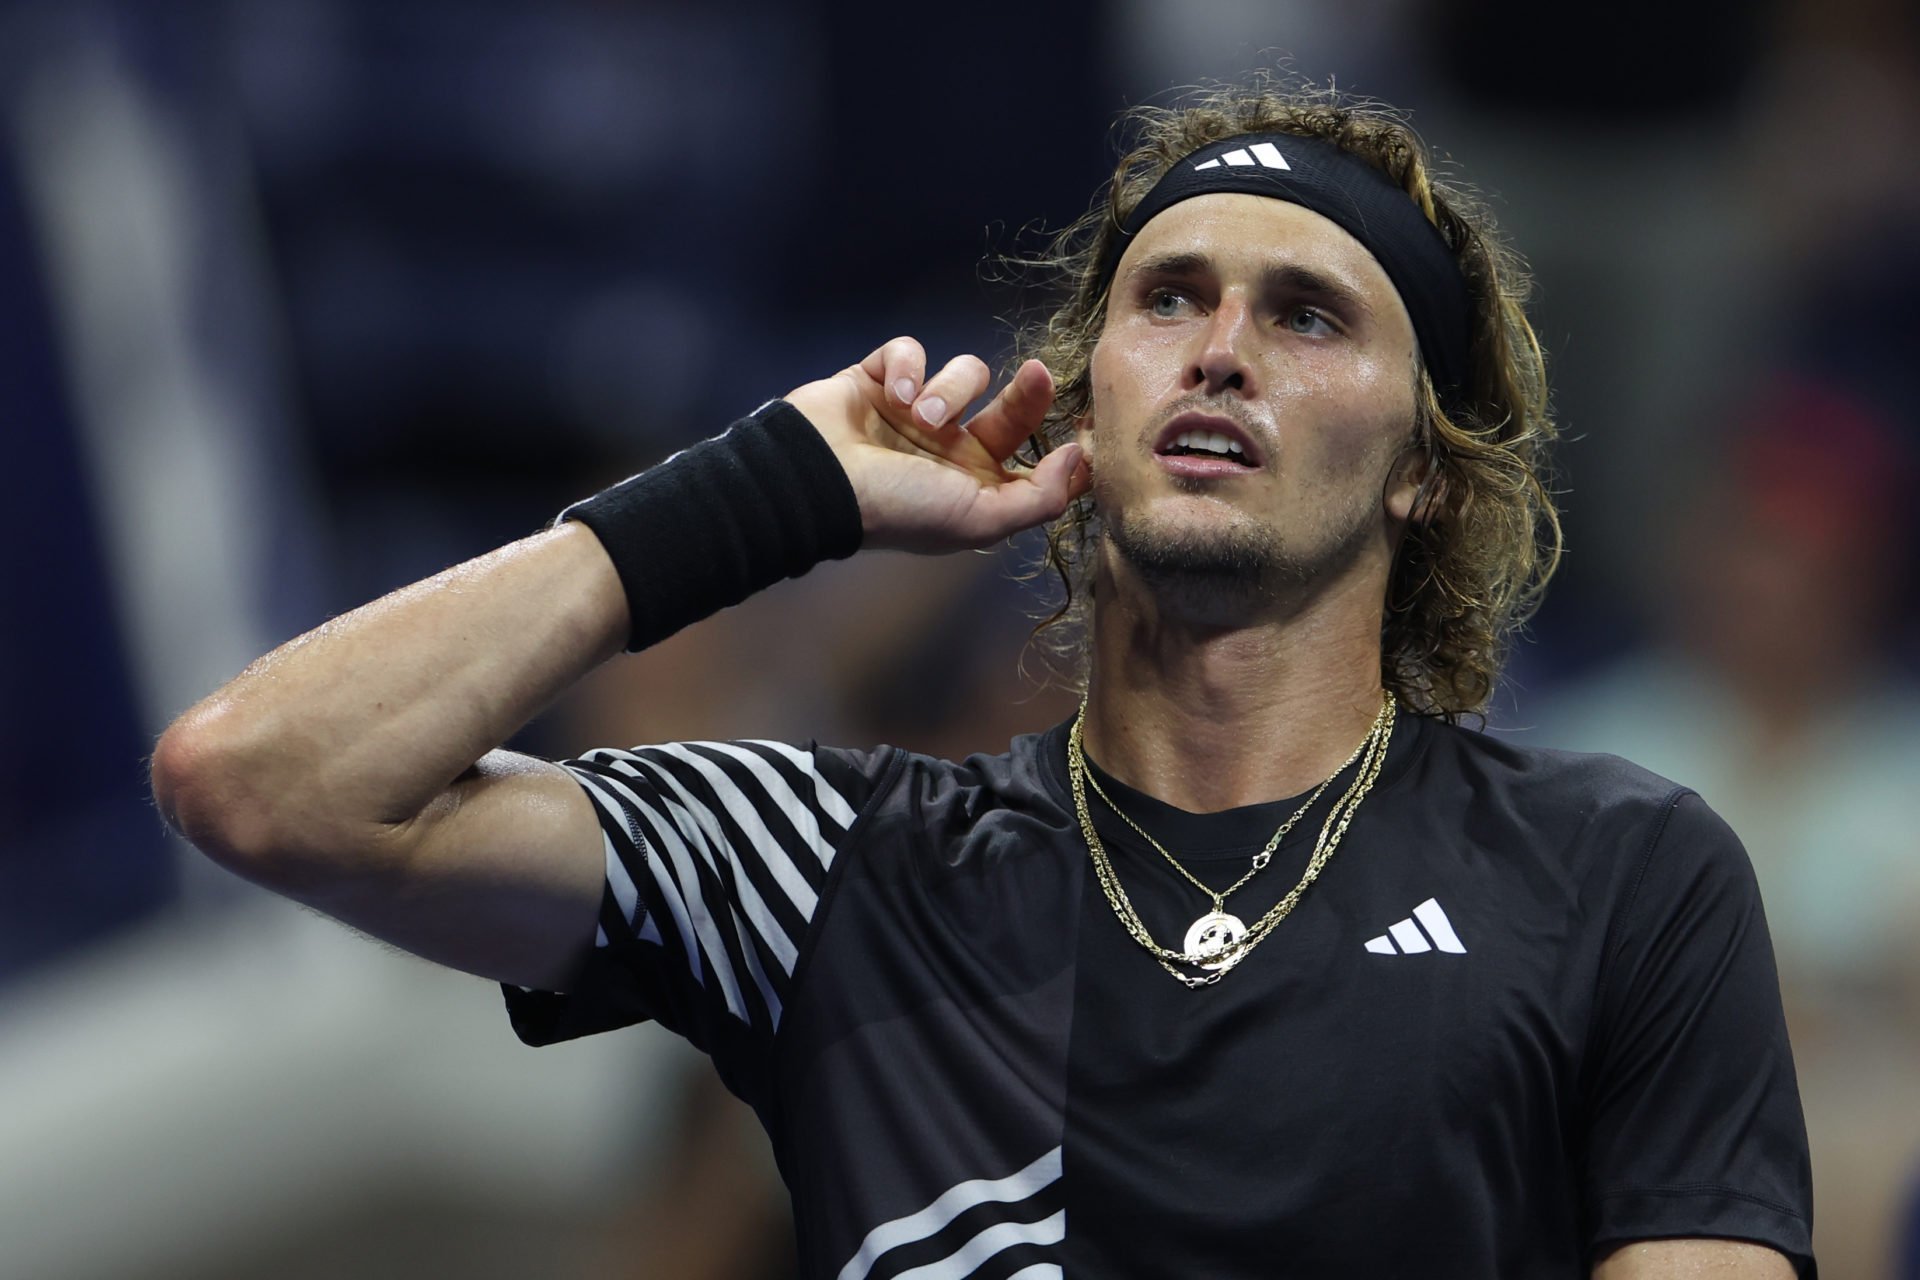 Alex Zverev reveals what 'most famous Hitler phrase' he heard at US Open was